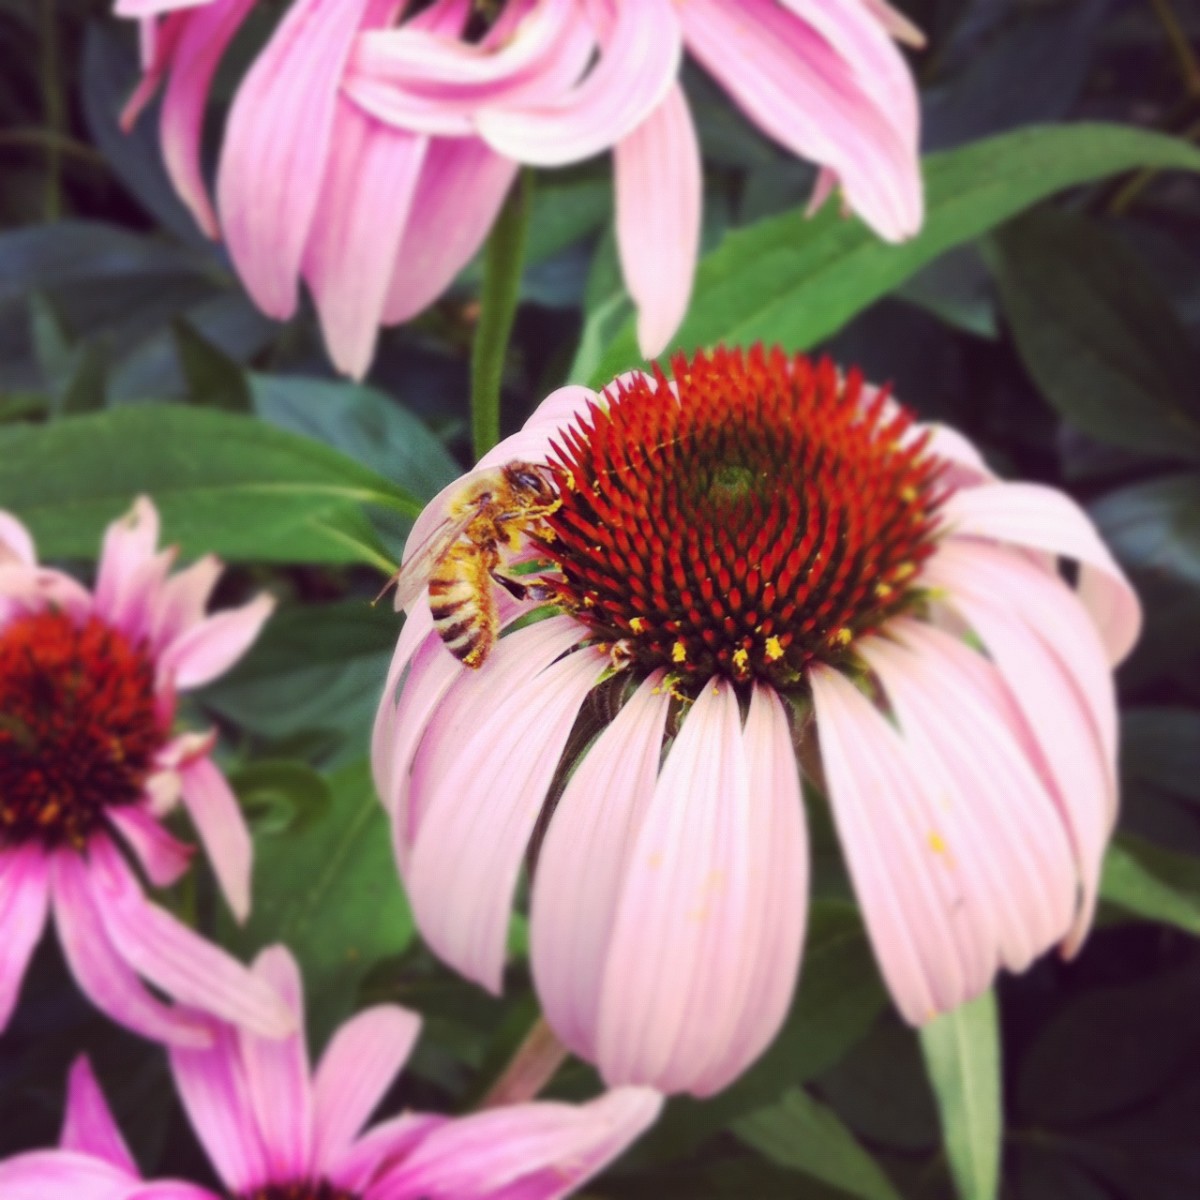 Bee on coneflowers in my front yard garden this summer.